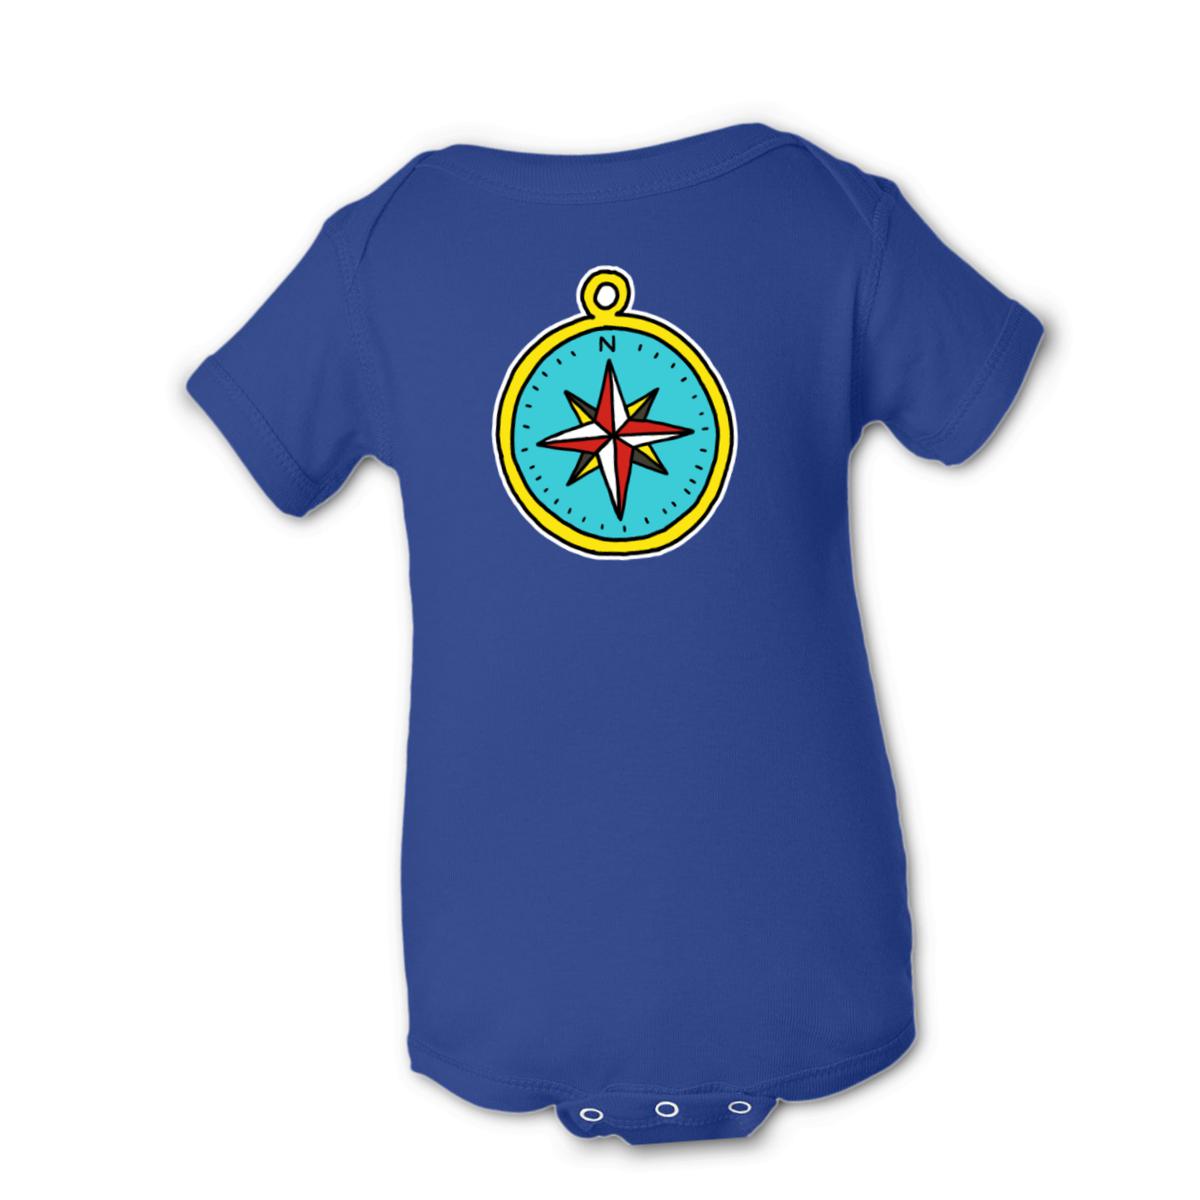 American Traditional Compass Onesie 18M royal-blue